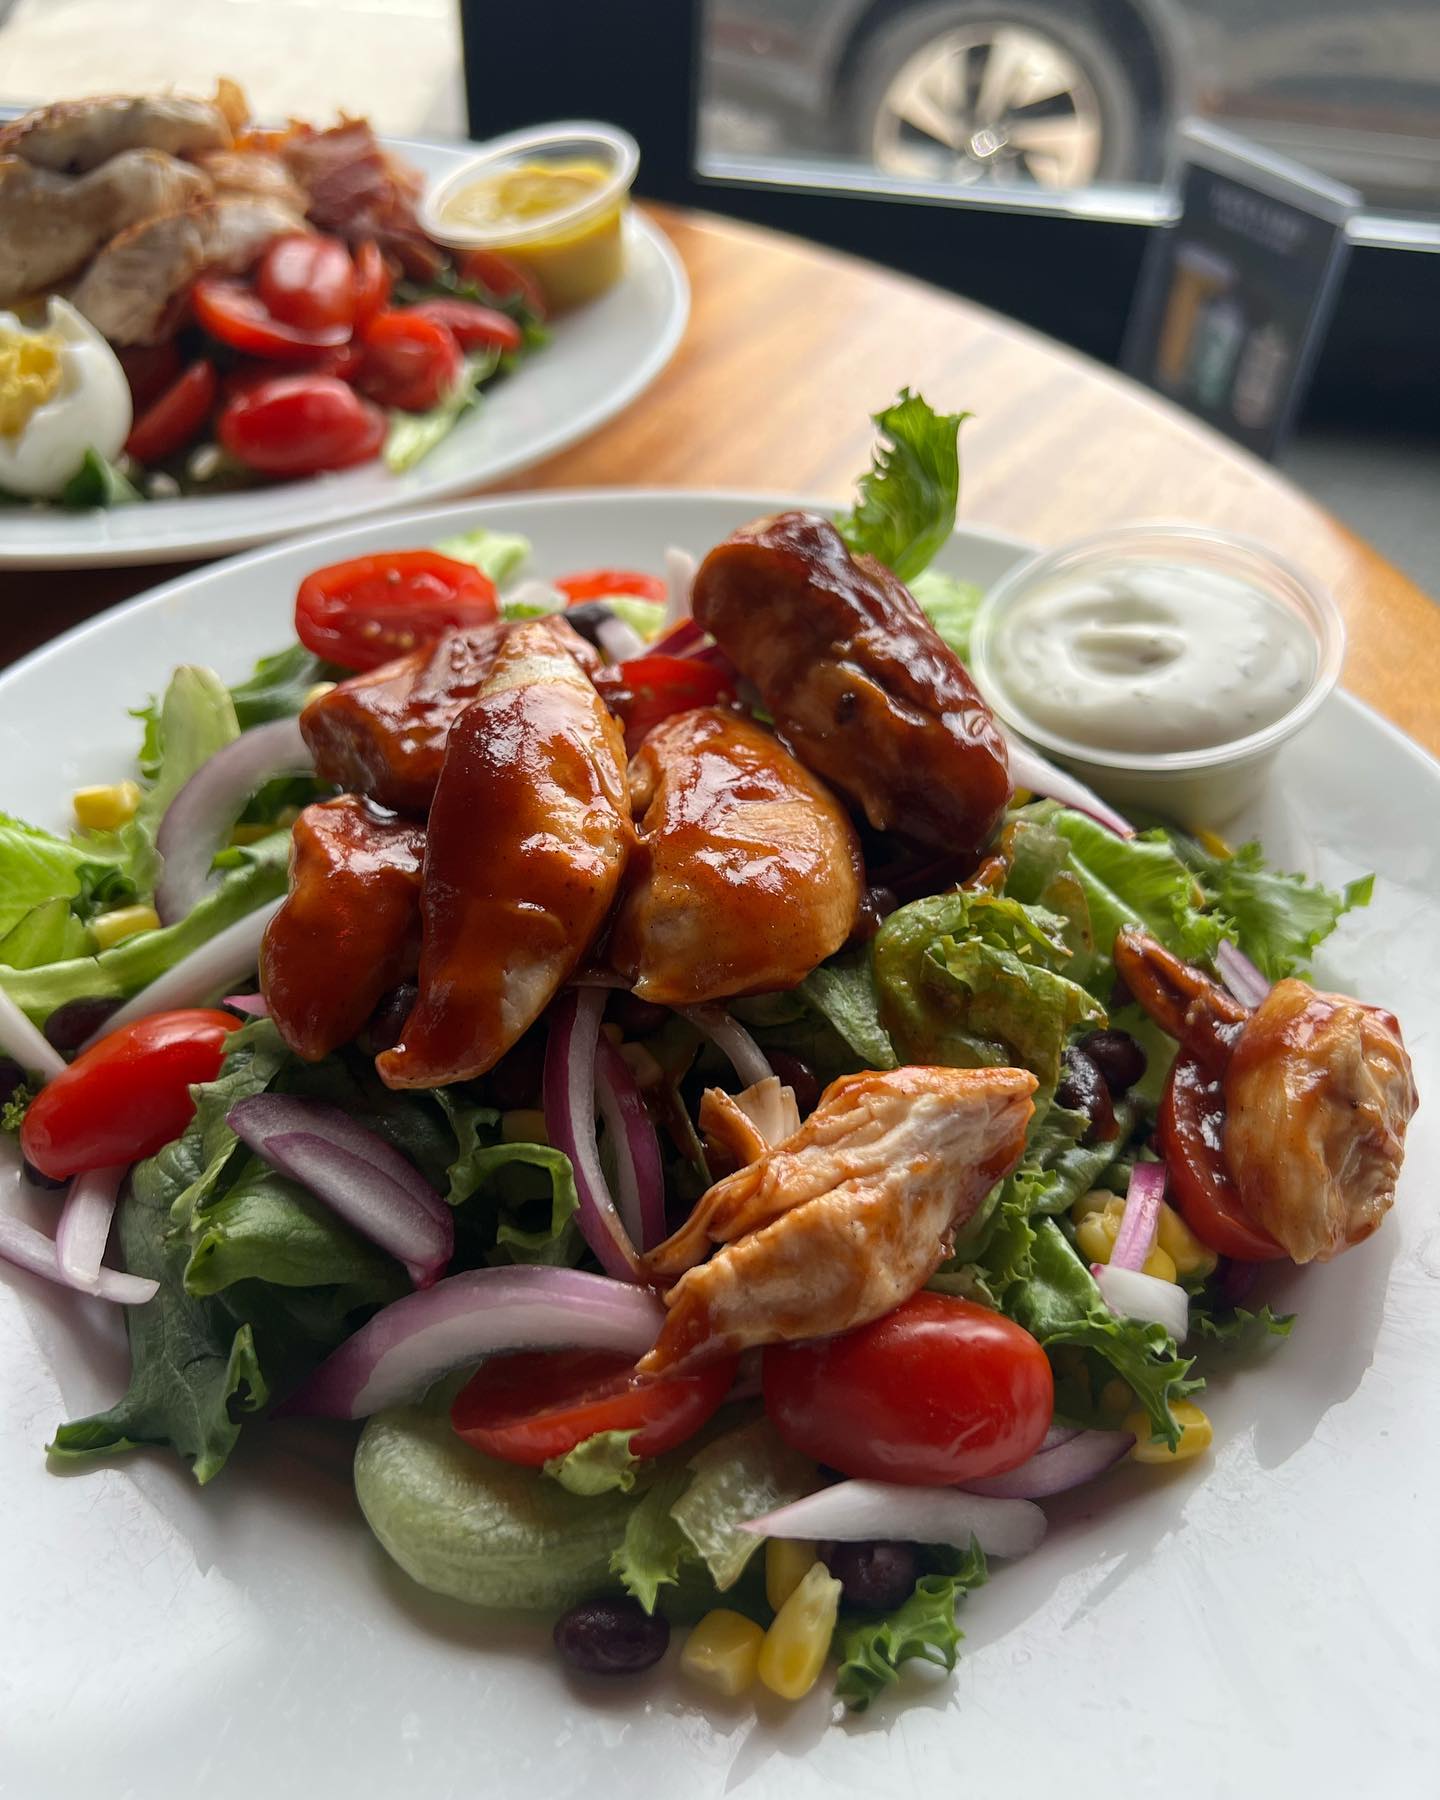 nice weather calls for yummy salads! ️🌭🥗on the specials board this week:
bbq chicken salad
cobb salad
1/4 lb hot dog!